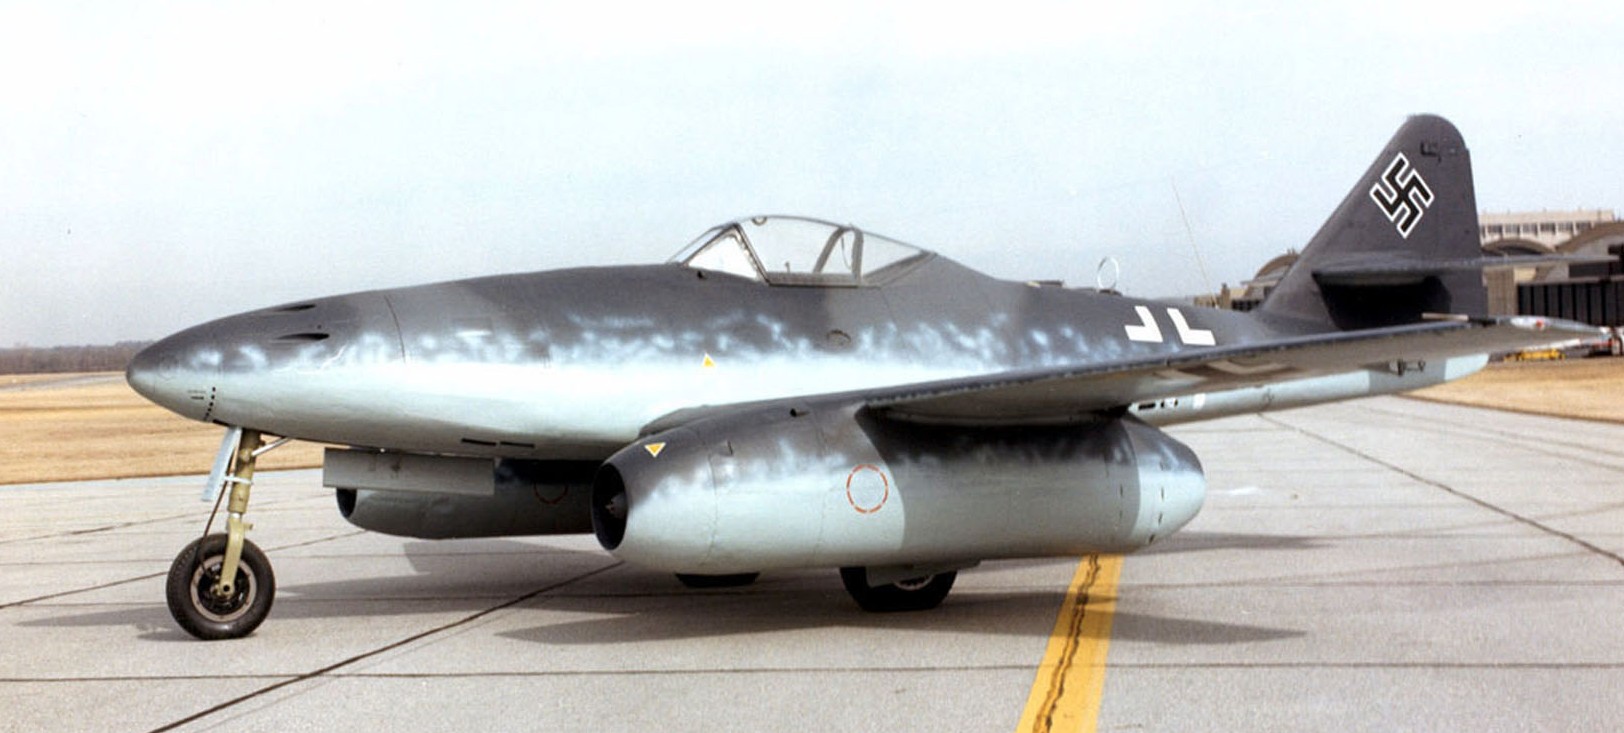 Me-262 at the National Museum of the US Air Force. (via wikipedia)